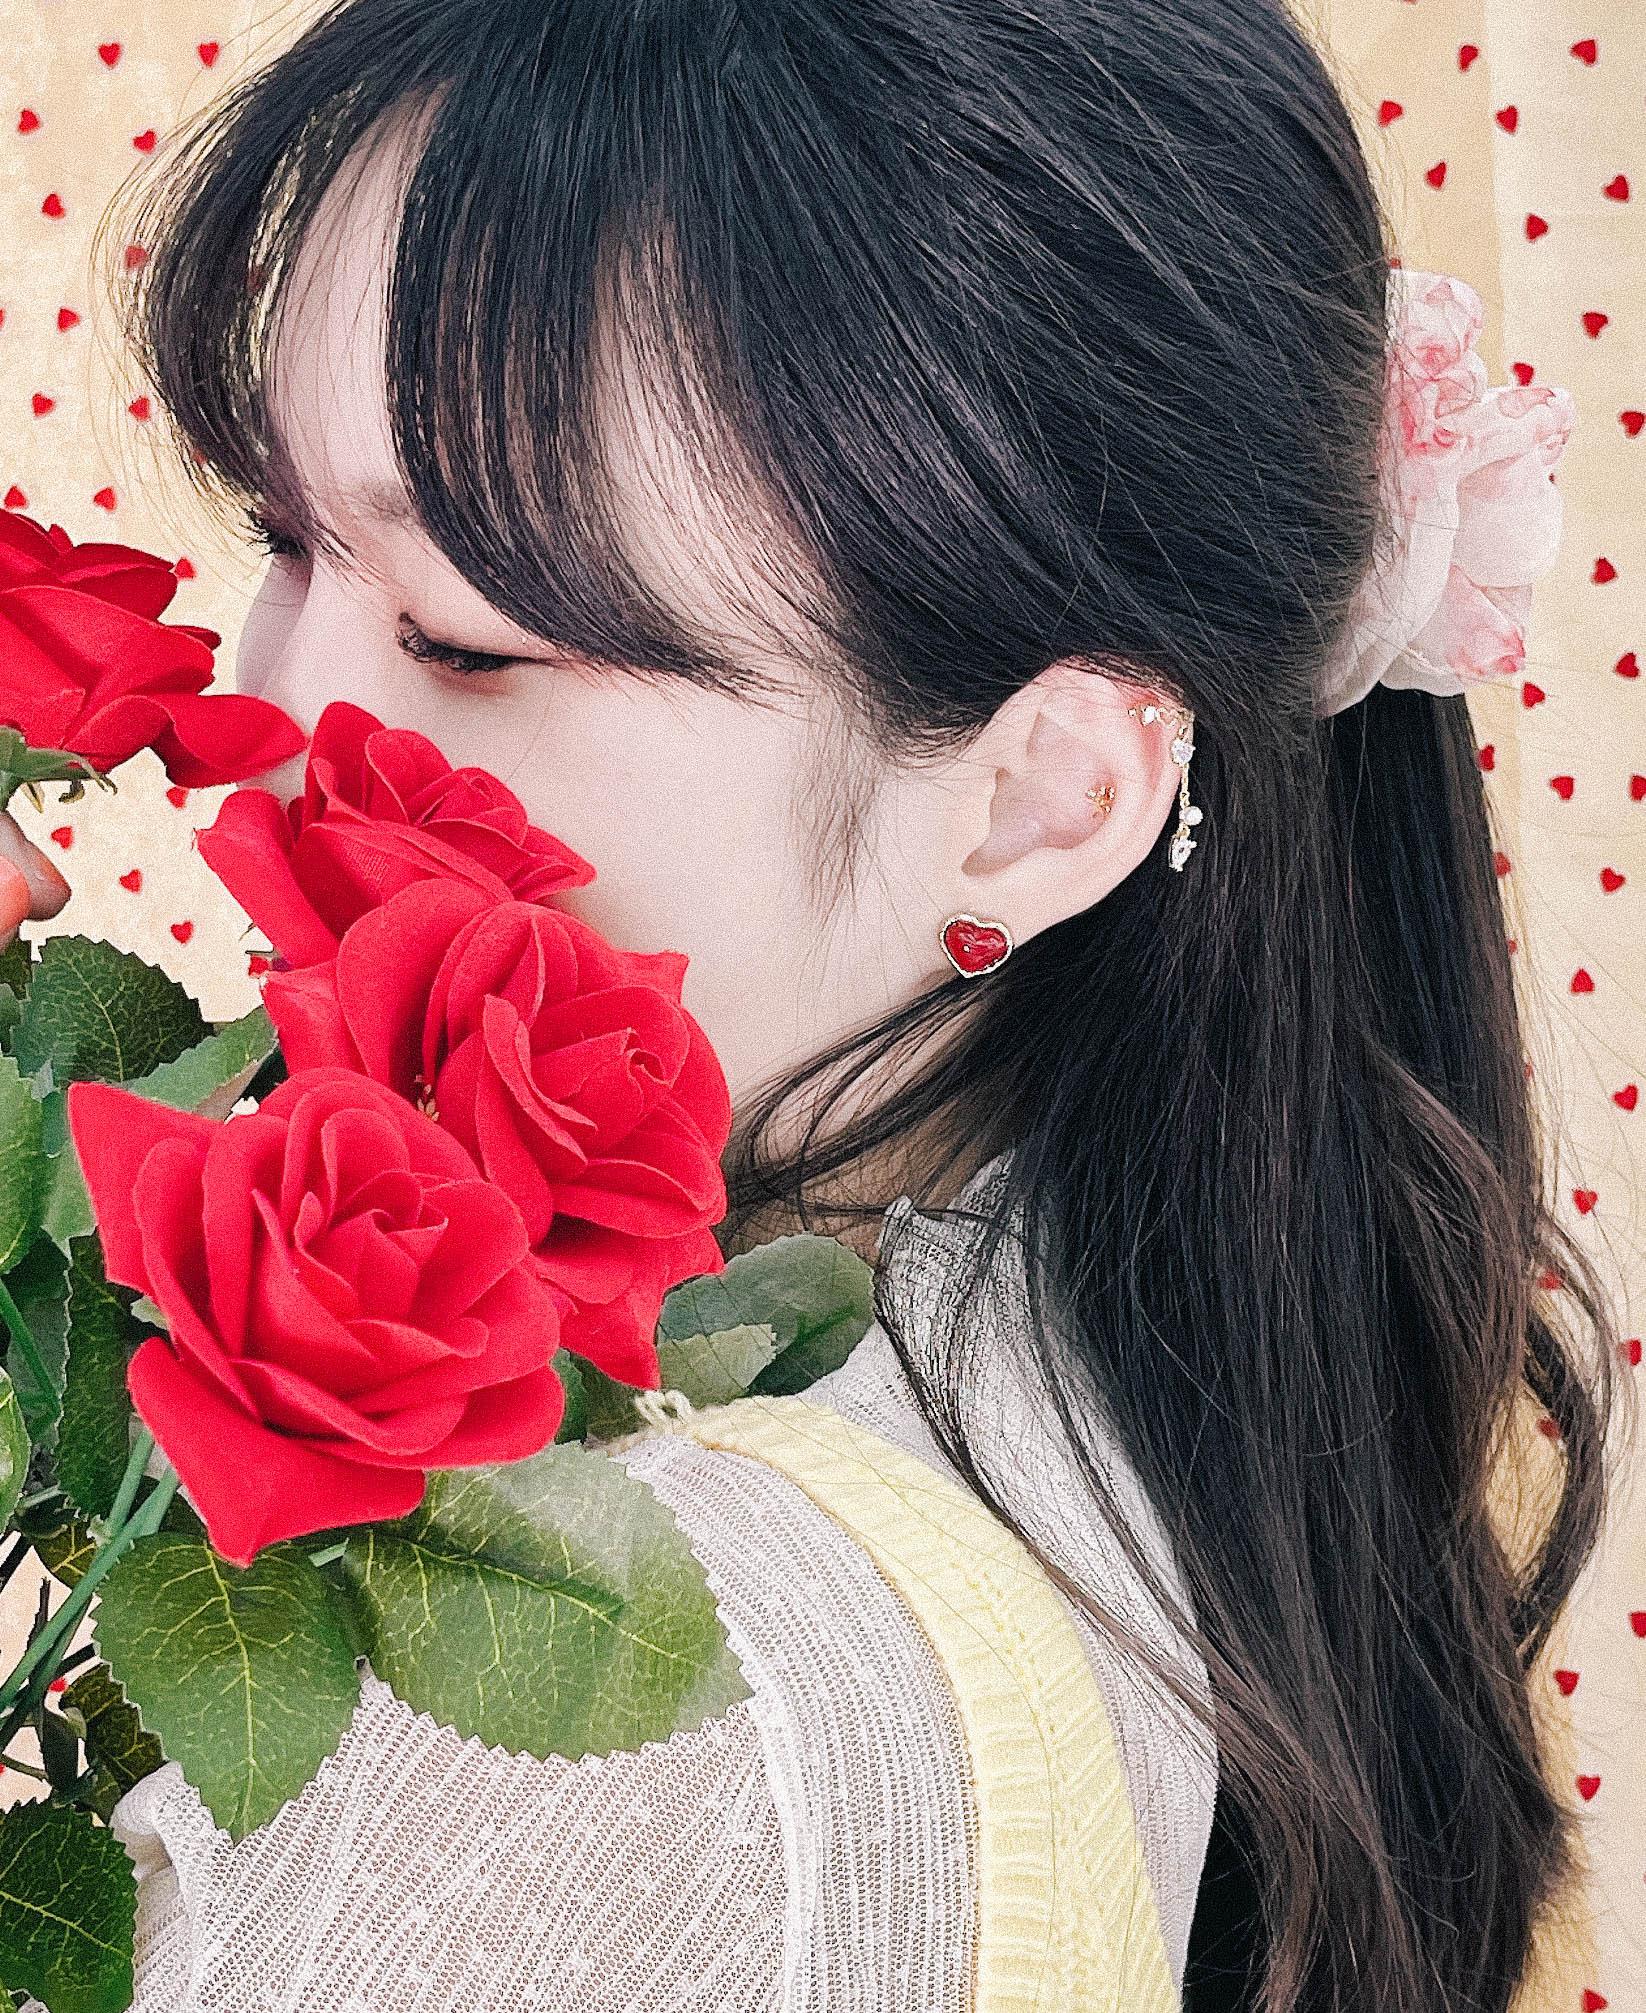 Bouquet イヤーカフ Earcuffs anything else 